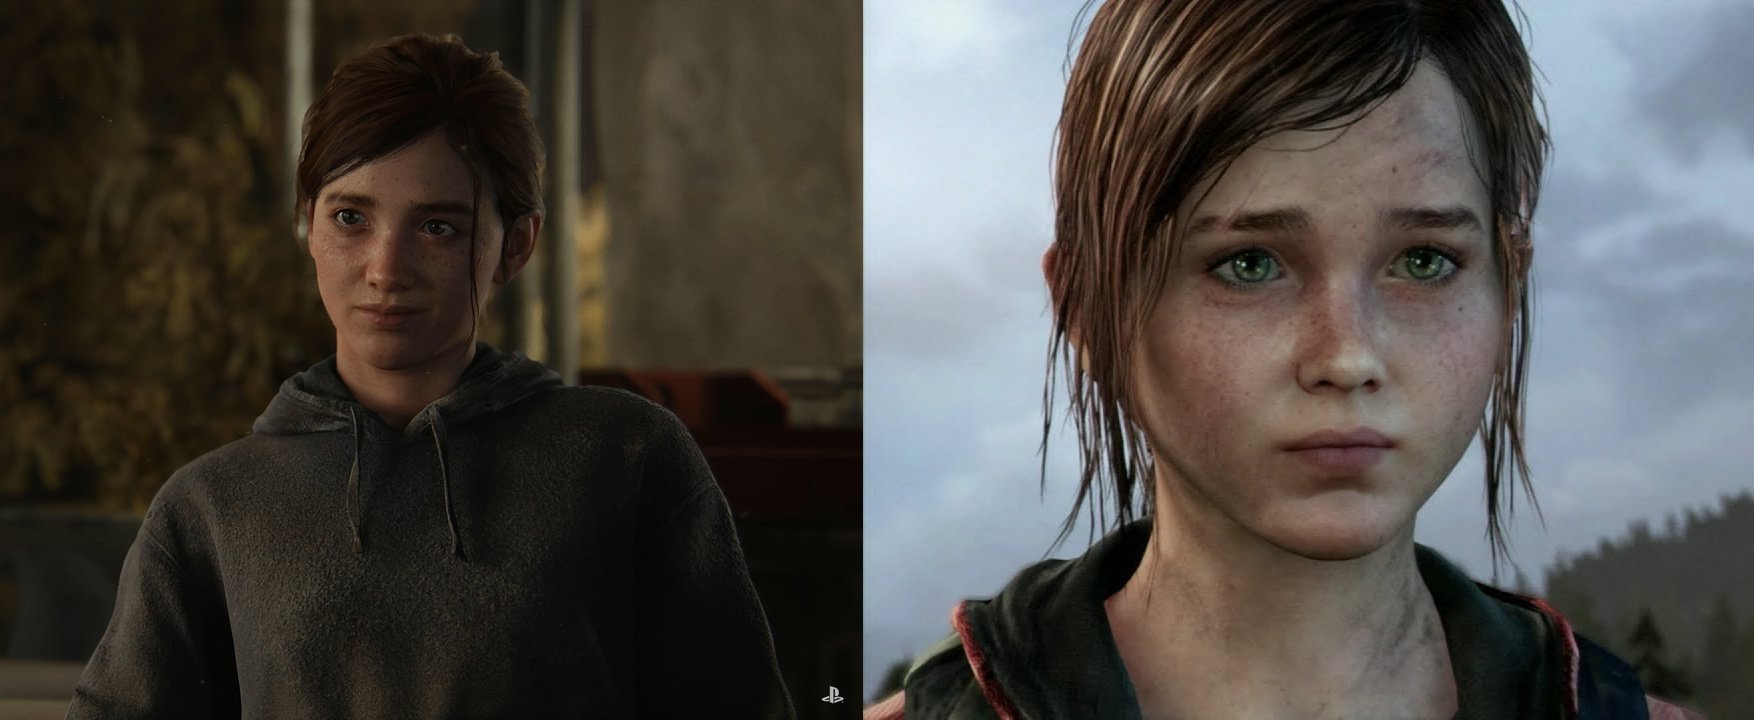 Random See How Joel And Ellie Compare To Their Past Selves In The Last Of Us 2 On Ps4 Push Square 